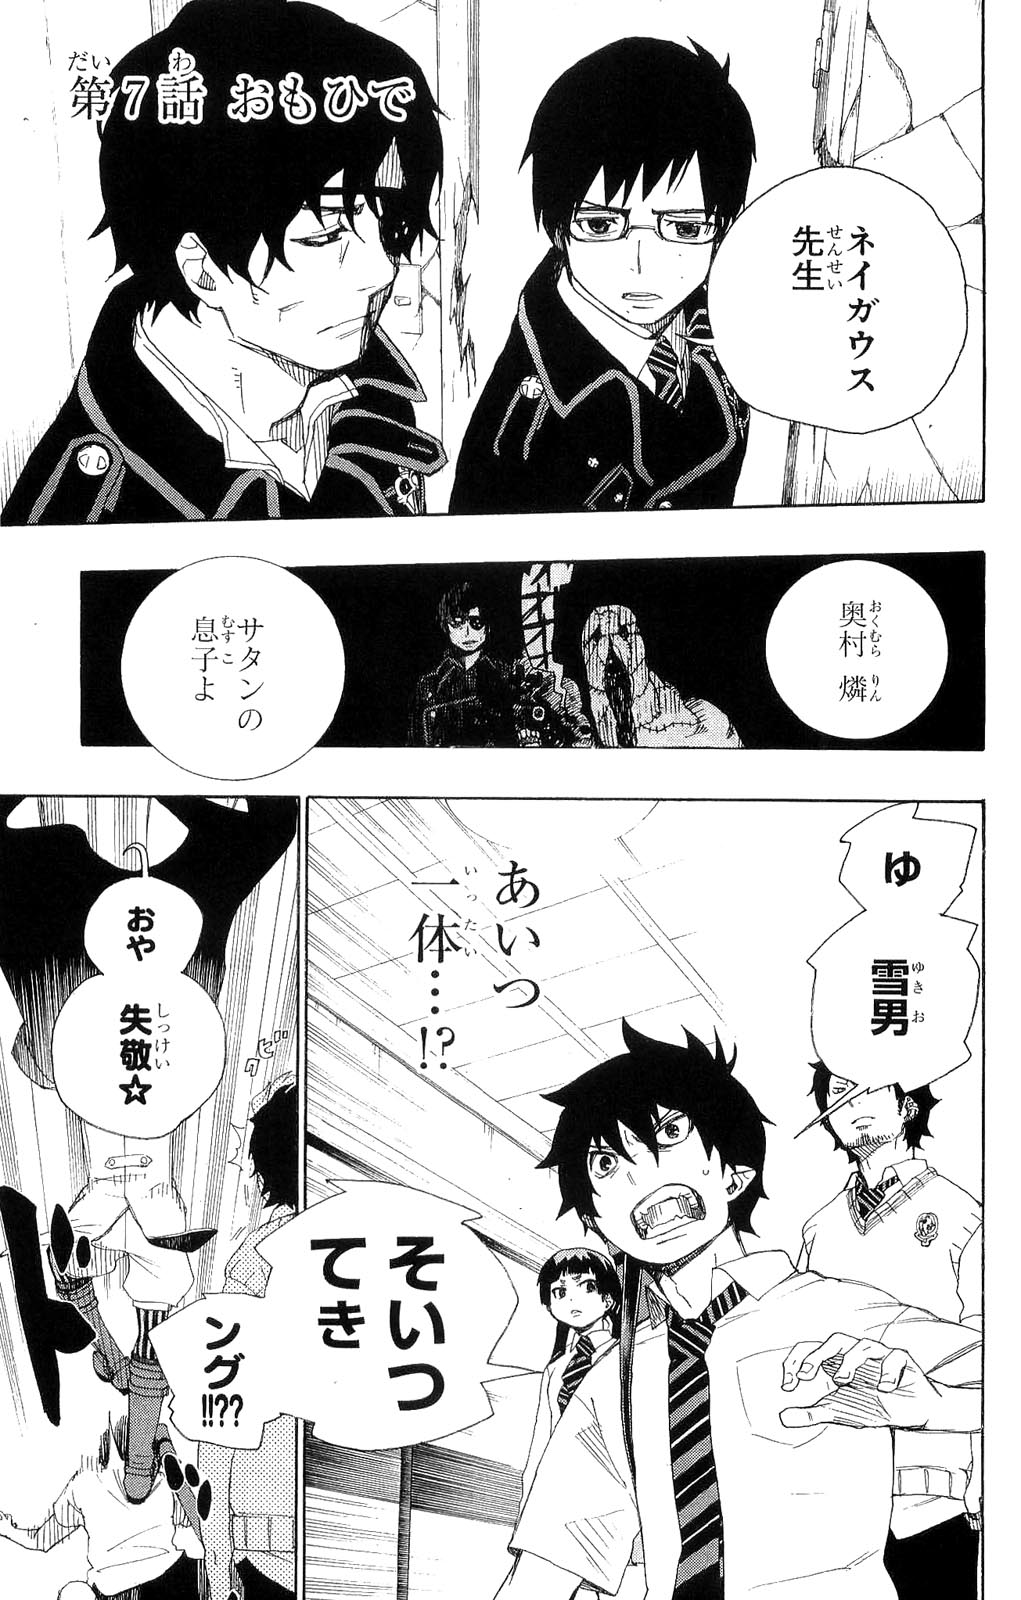 Ao no Exorcist - Chapter 7 - Page 1